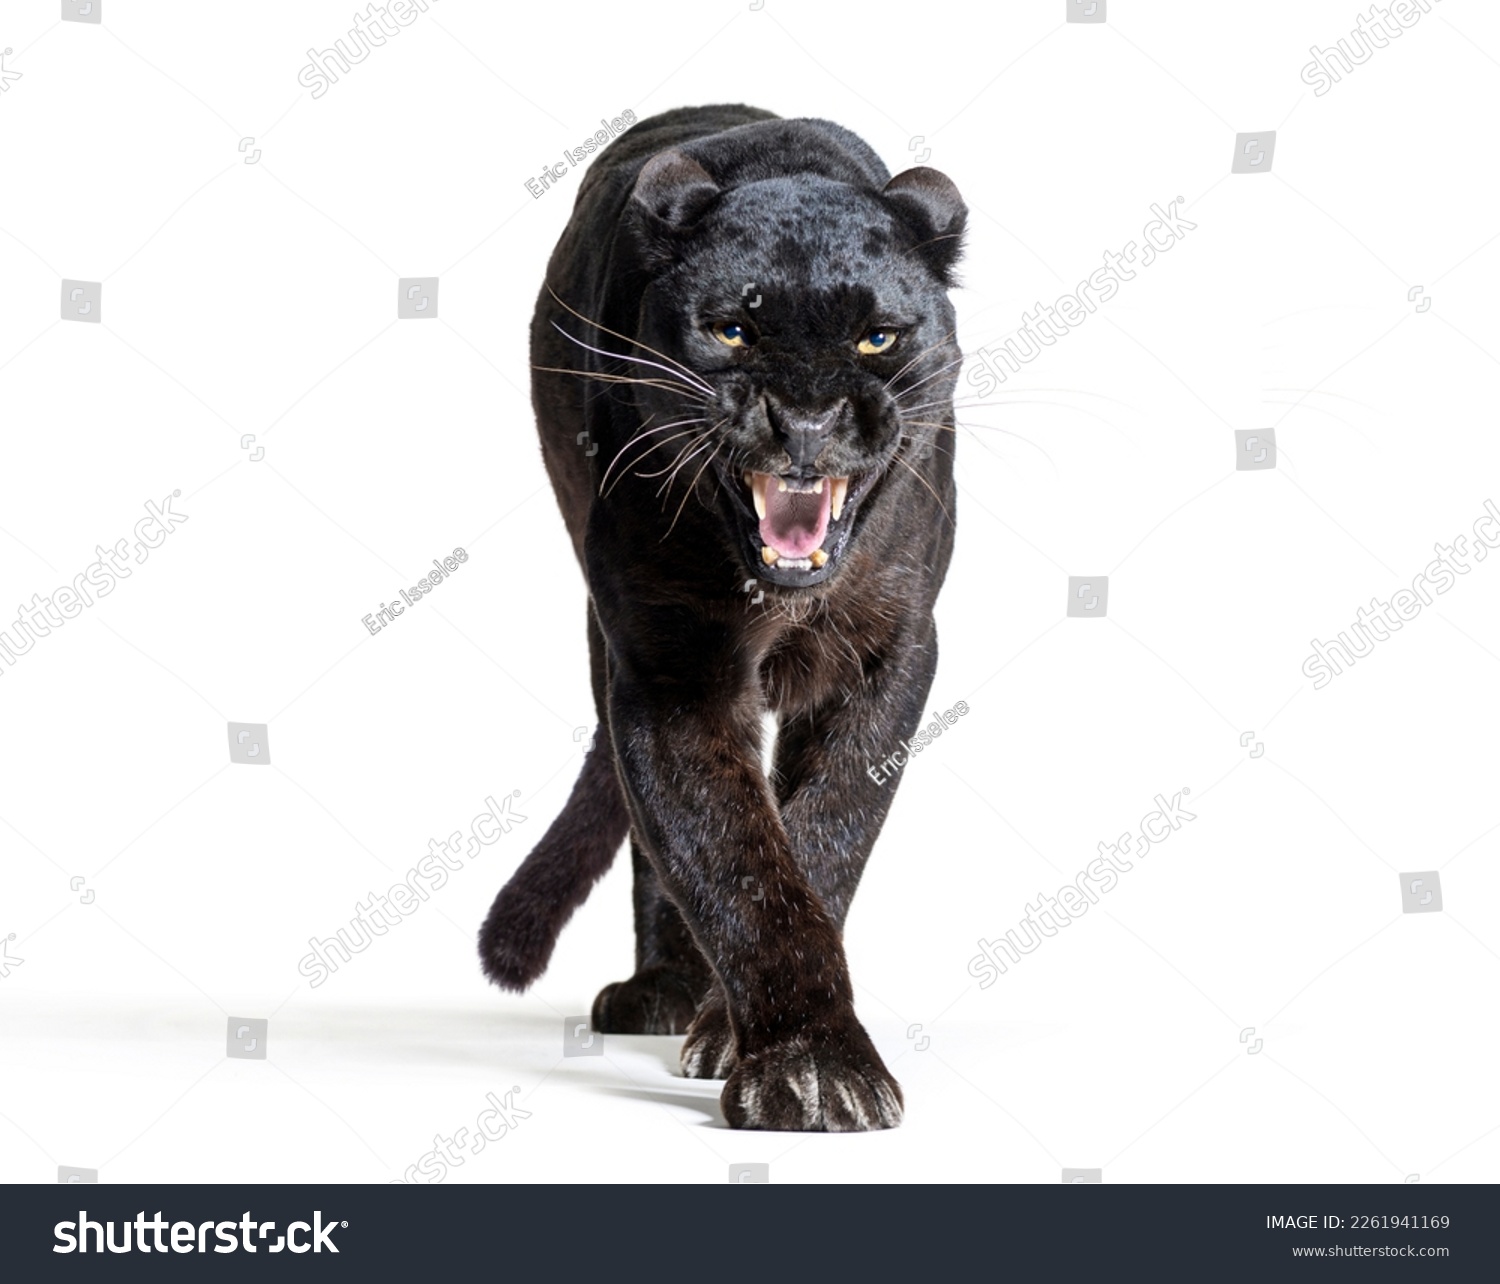 black leopard, panthera pardus, walking towards, staring at the camera and showing his teeth, isolated on white #2261941169